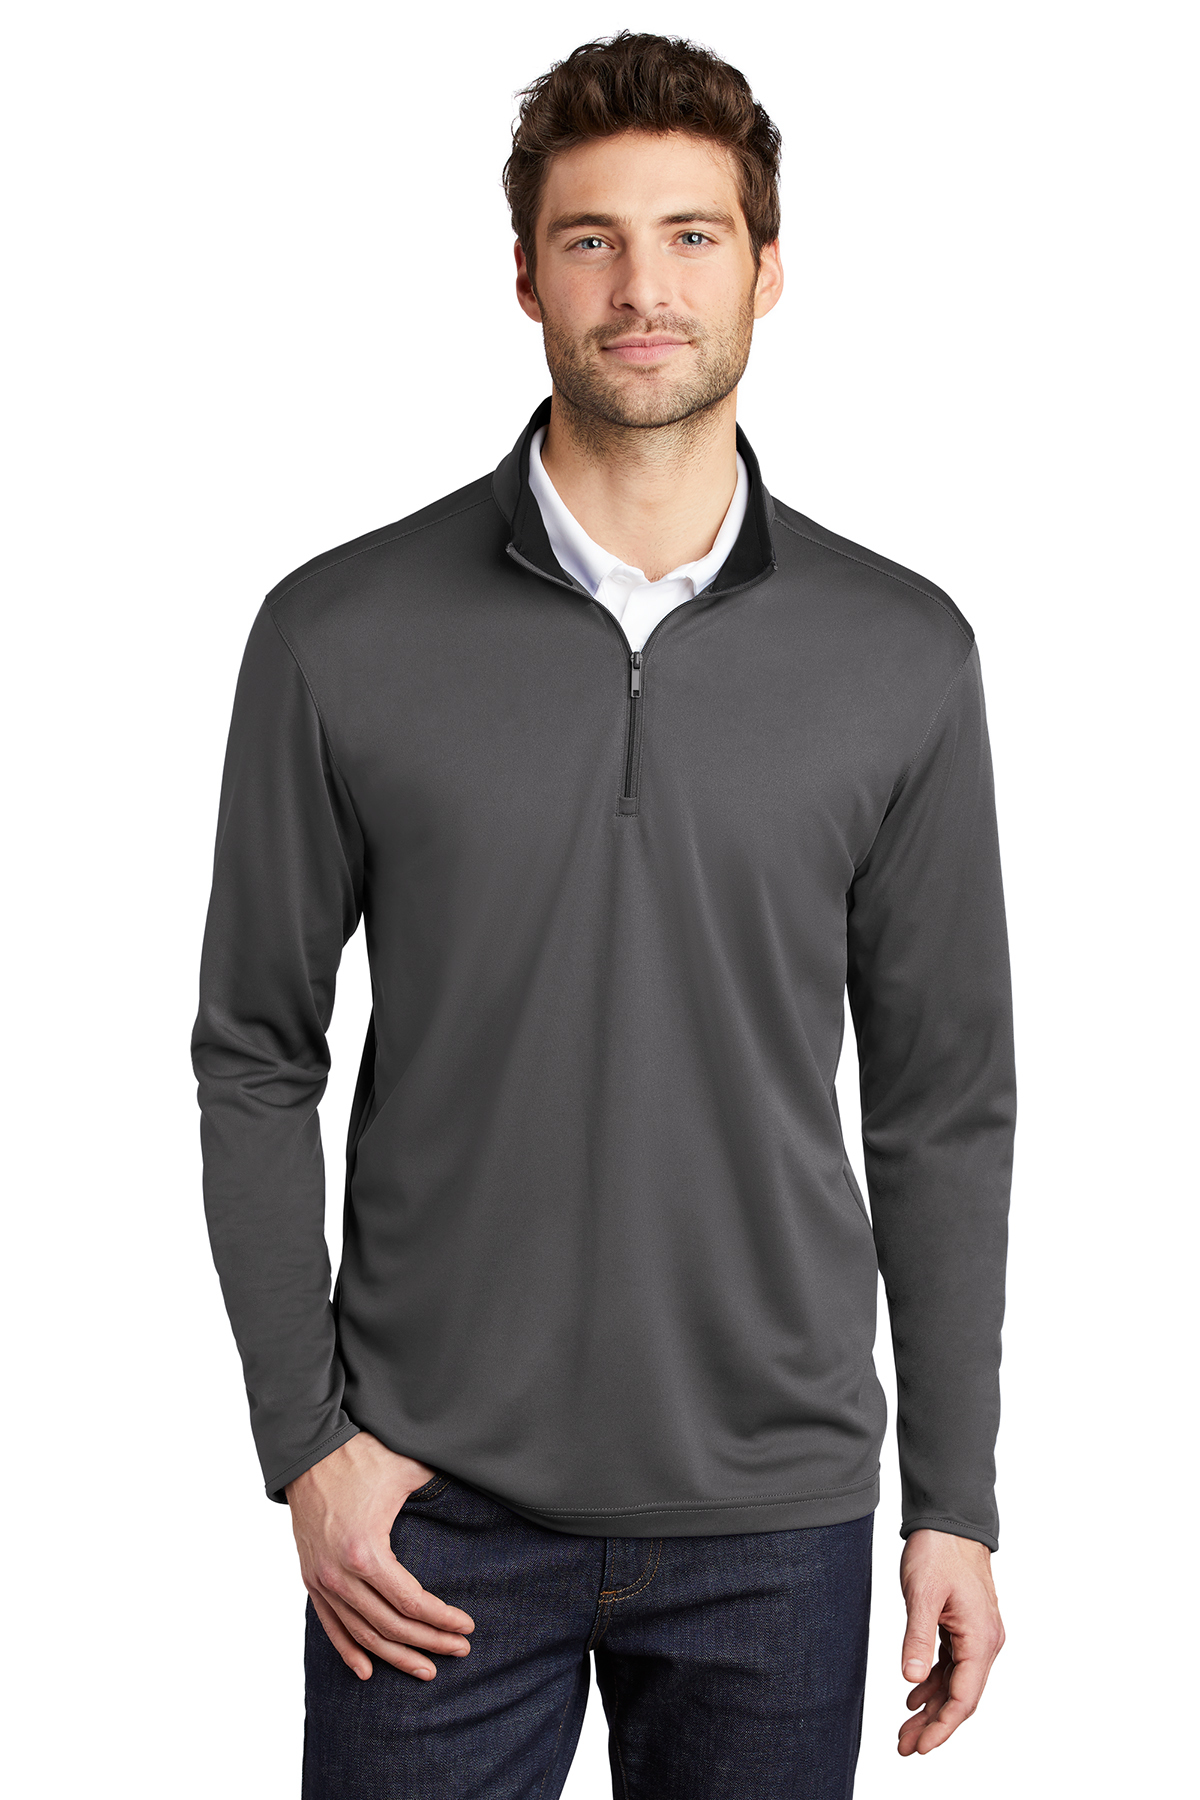 Port Authority Silk Touch Performance 1/4-Zip | Product | SanMar